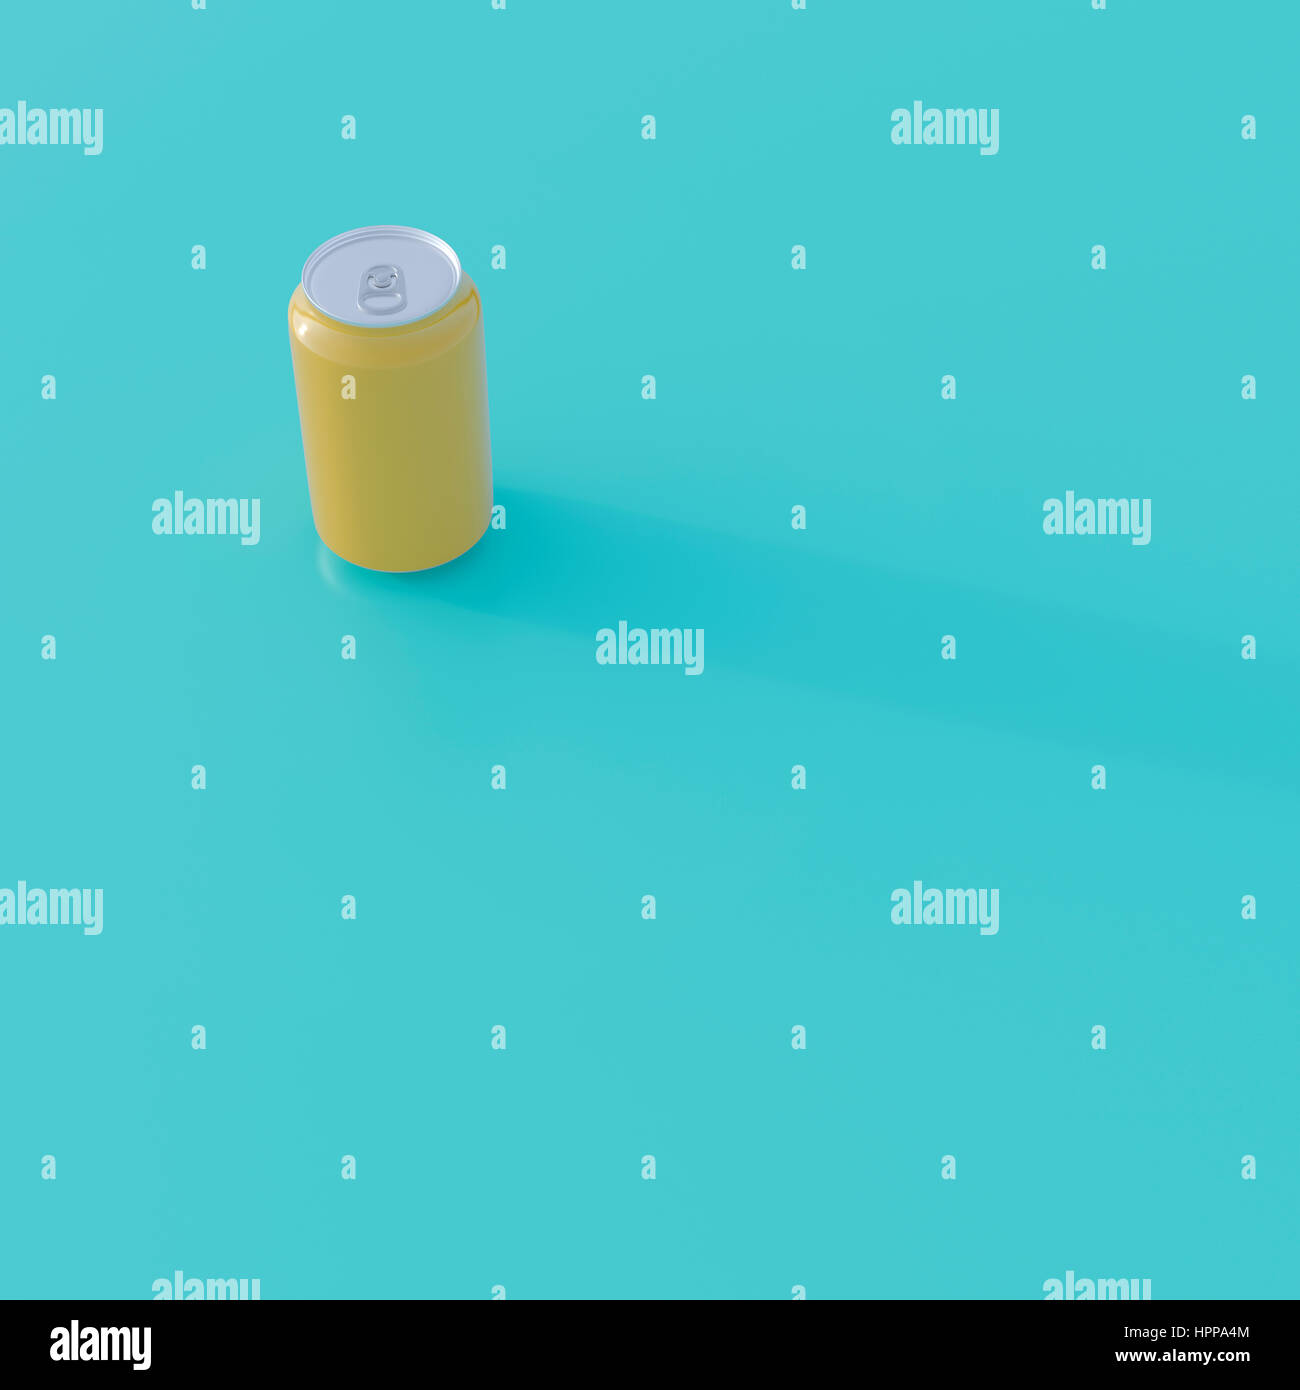 Yellow beverage can on turquoise ground, 3D Rendering Stock Photo